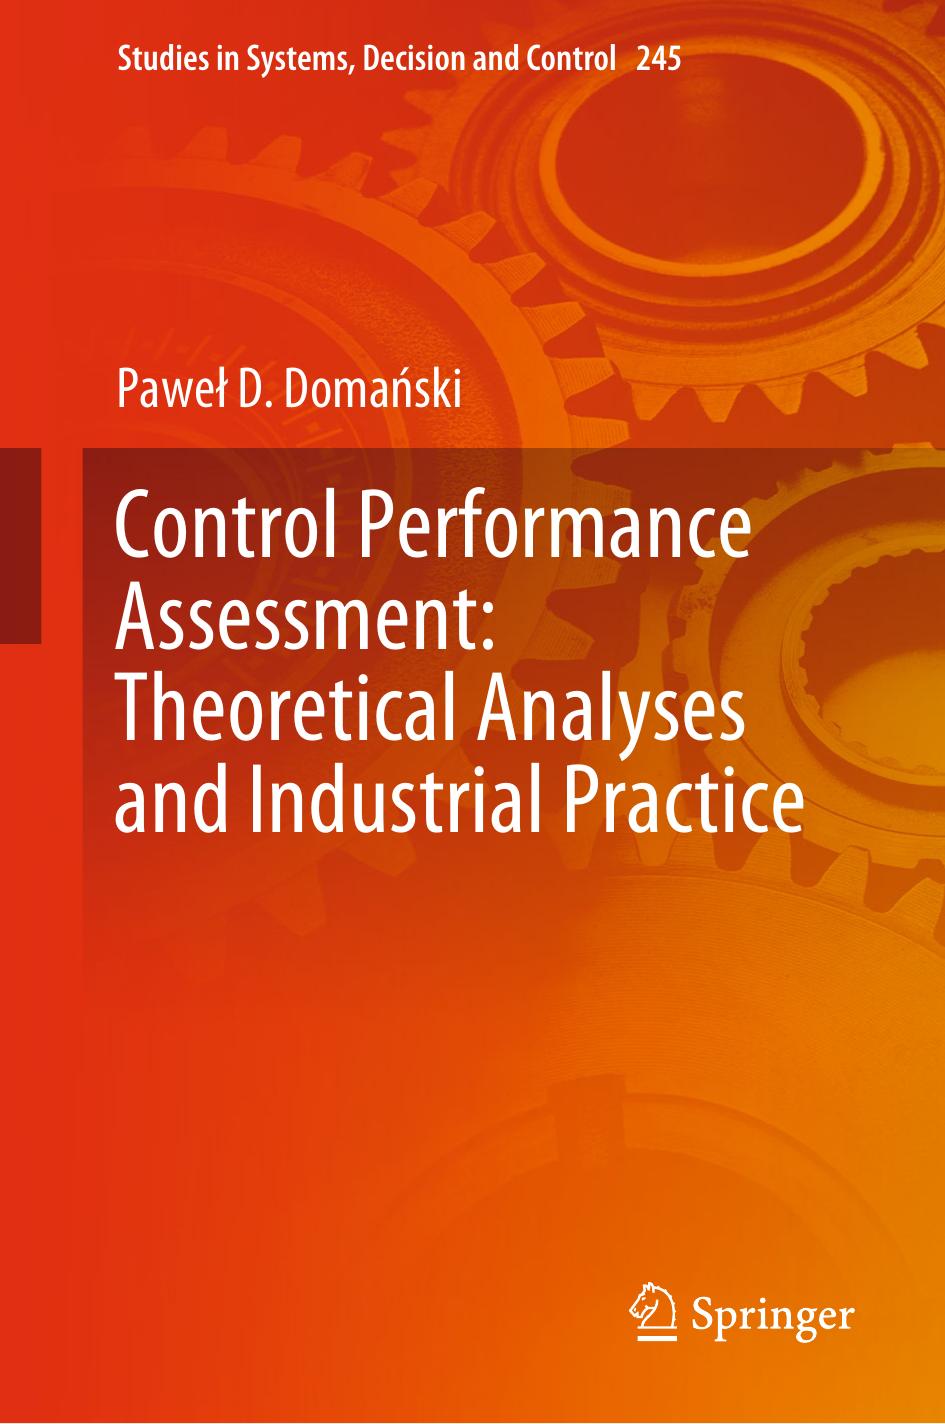 Control Performance Assessment: Theoretical Analyses and Industrial Practice by Paweł D. Domański